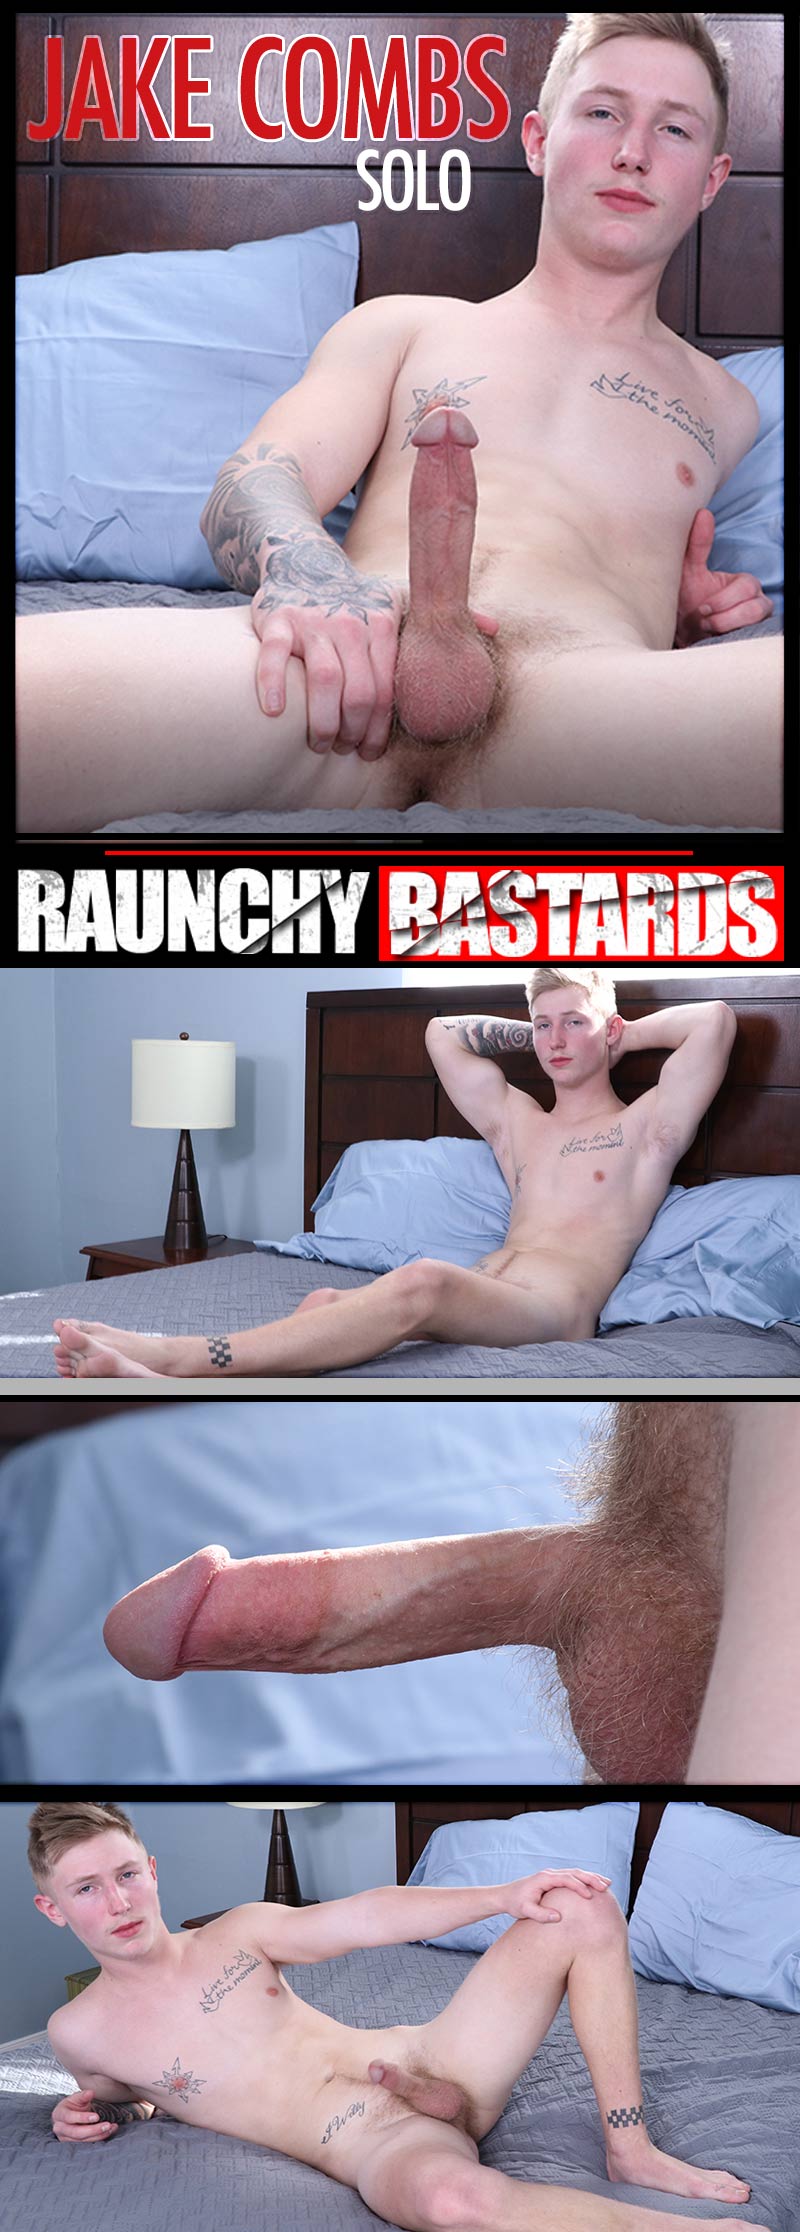 Jake Combs Shows Off at Raunch Bastards